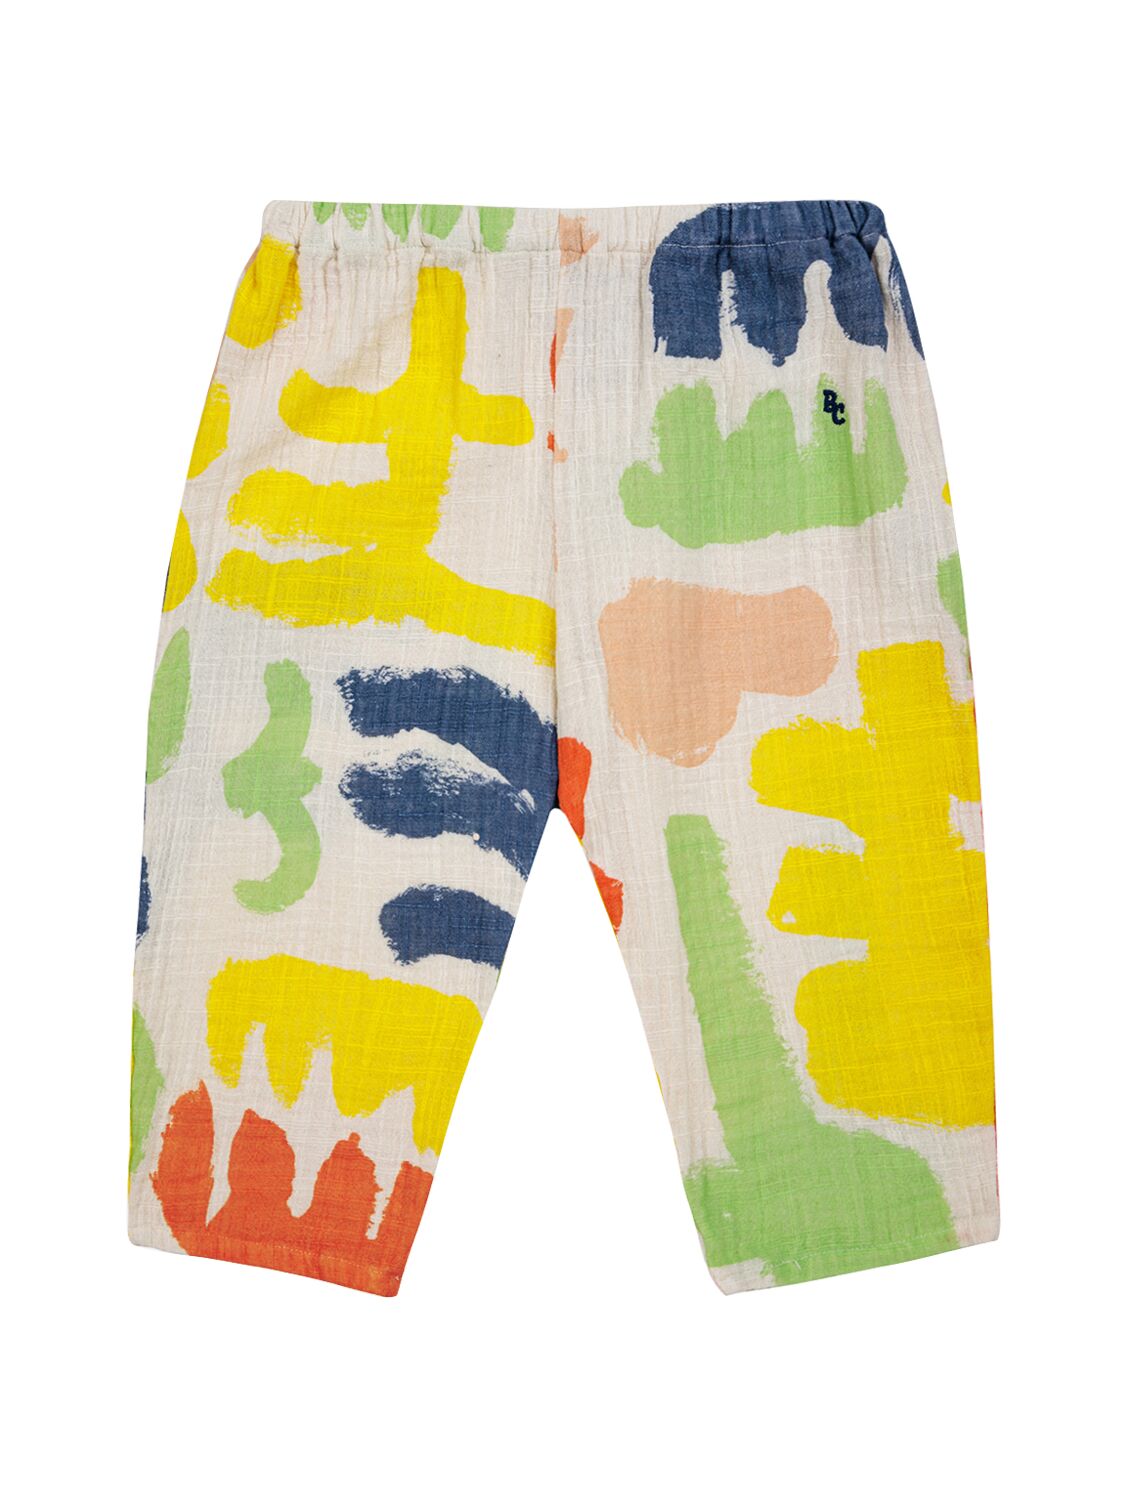 Image of Printed Woven Cotton Pants